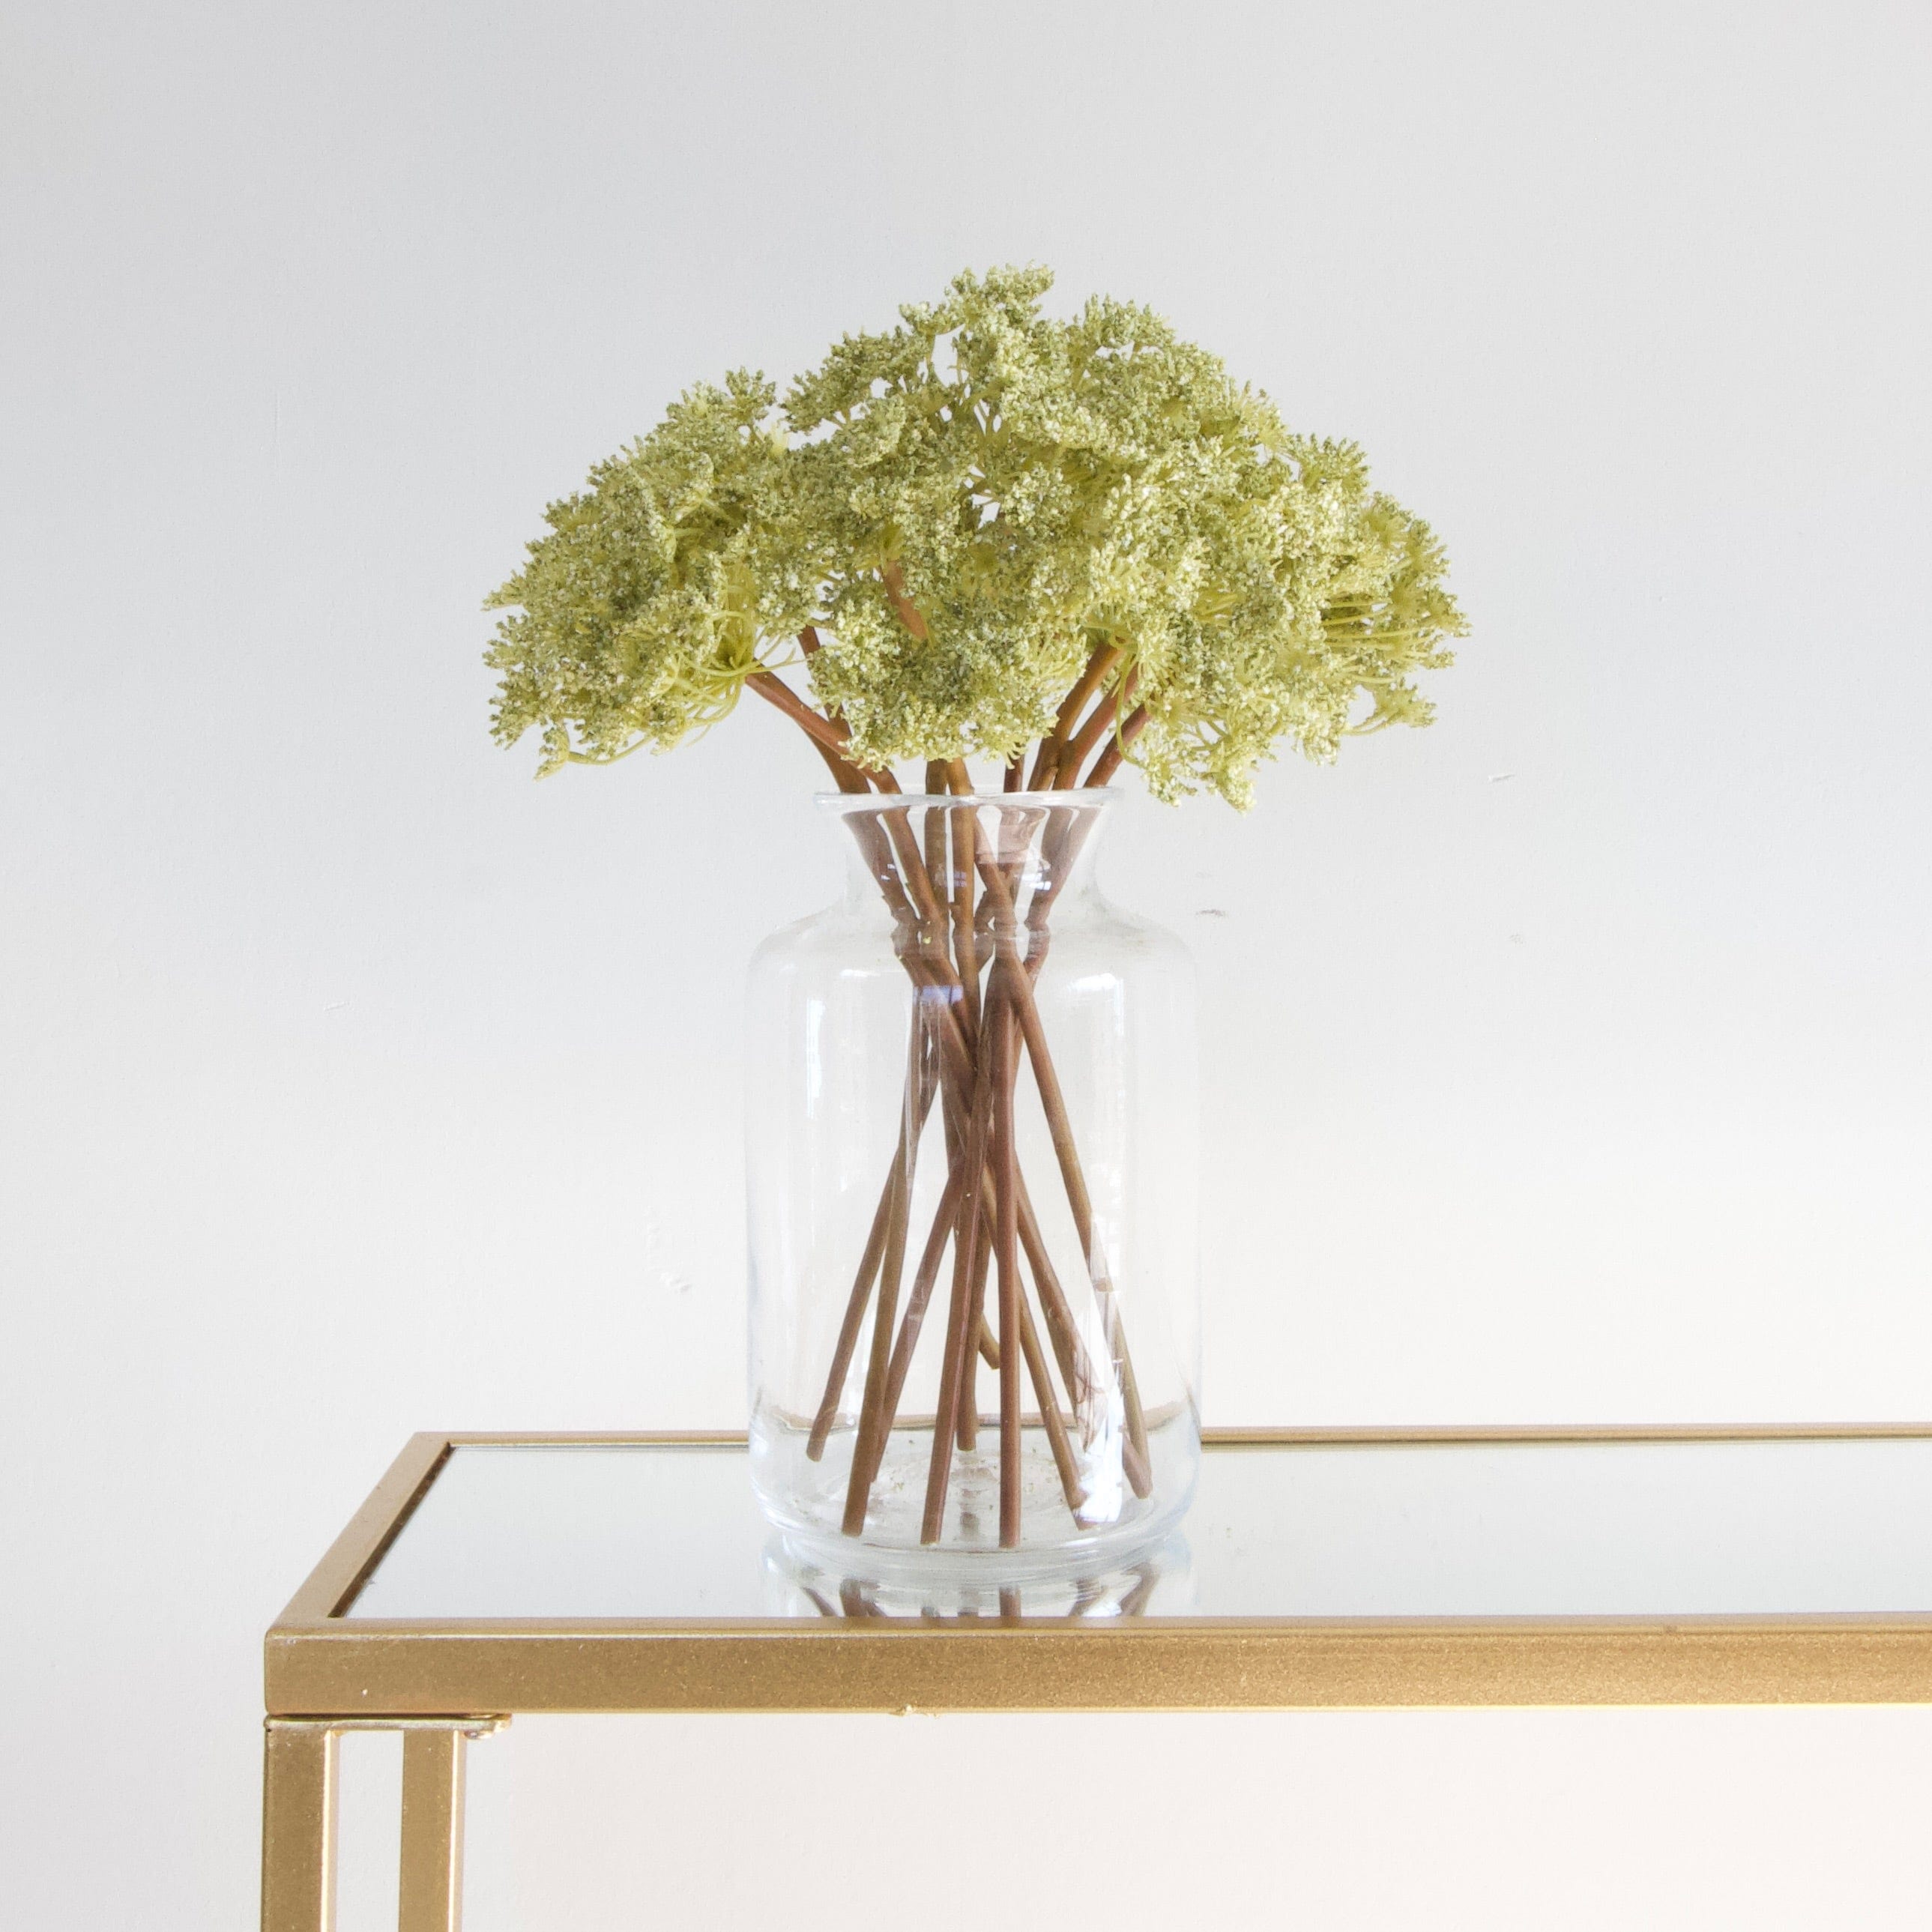 Luxury Lifelike Realistic Artificial Fabric Silk Blooms with Foliage Buy Online from The Faux Flower Company | 12 stems of Green Cow Parsley ABX6597GR styled in Clear Funnel Neck Vase ABV2252